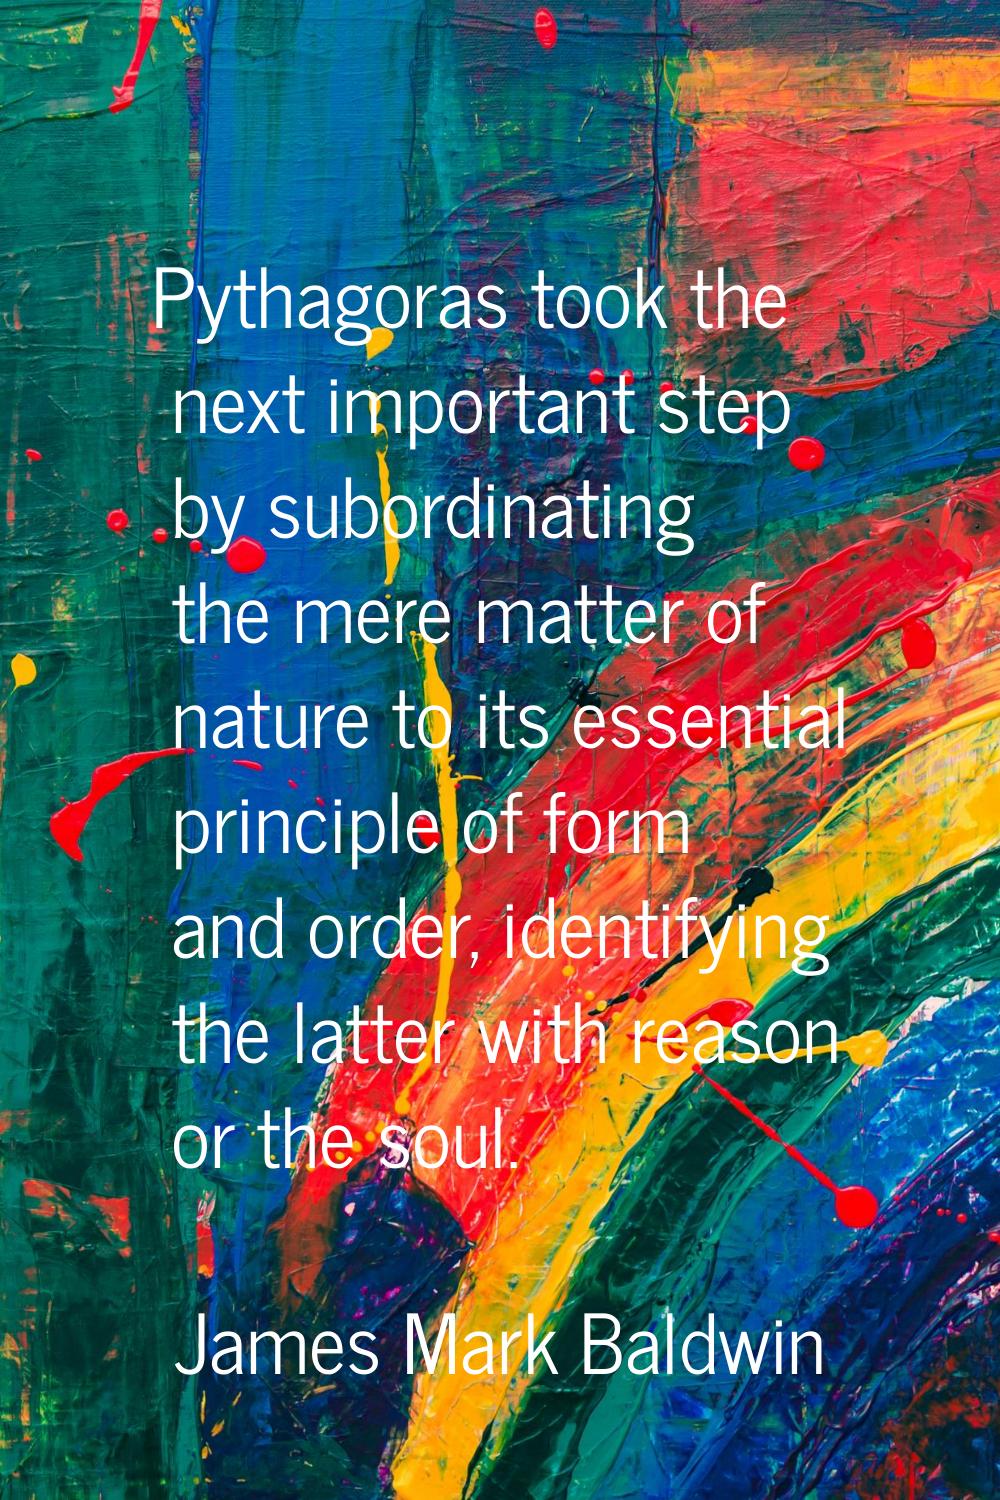 Pythagoras took the next important step by subordinating the mere matter of nature to its essential